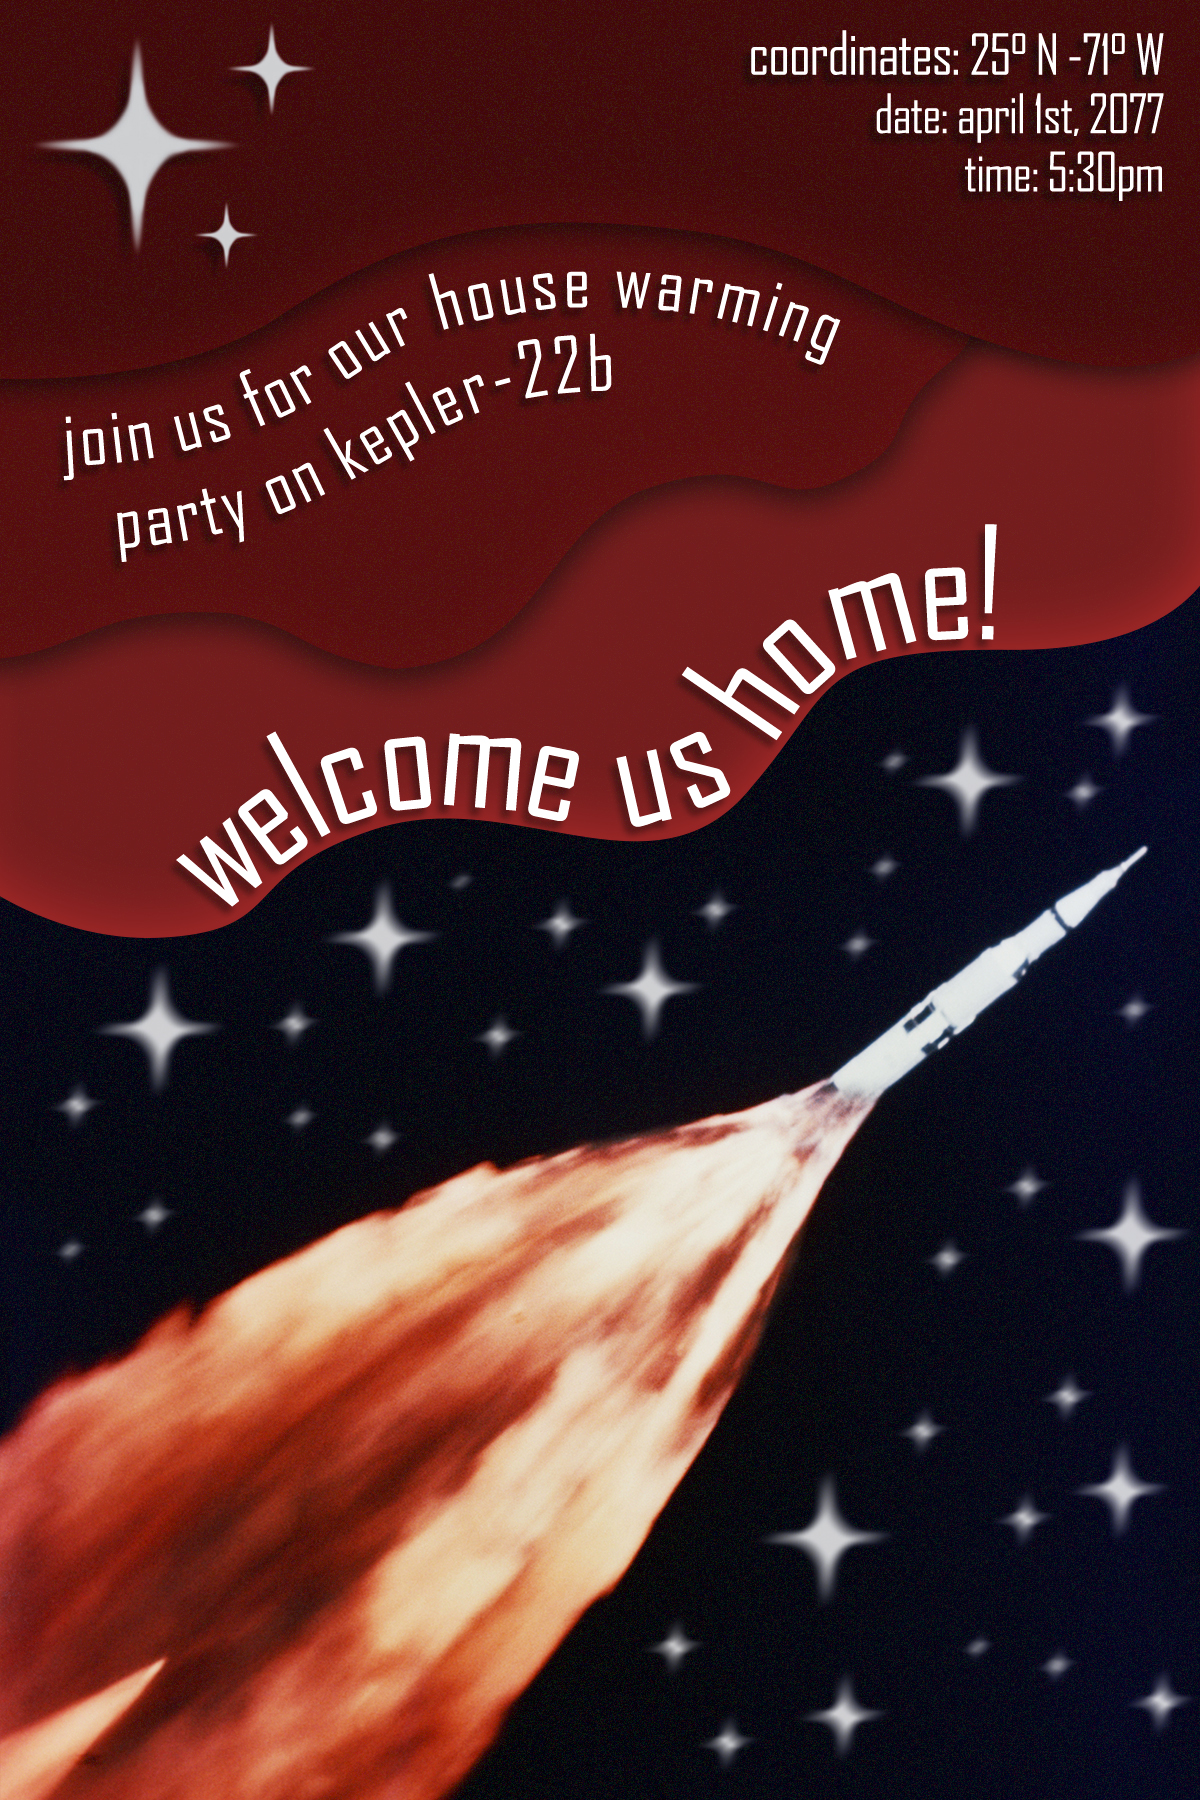 A postcard invitation for a housewarming party on Kepler 22-b.